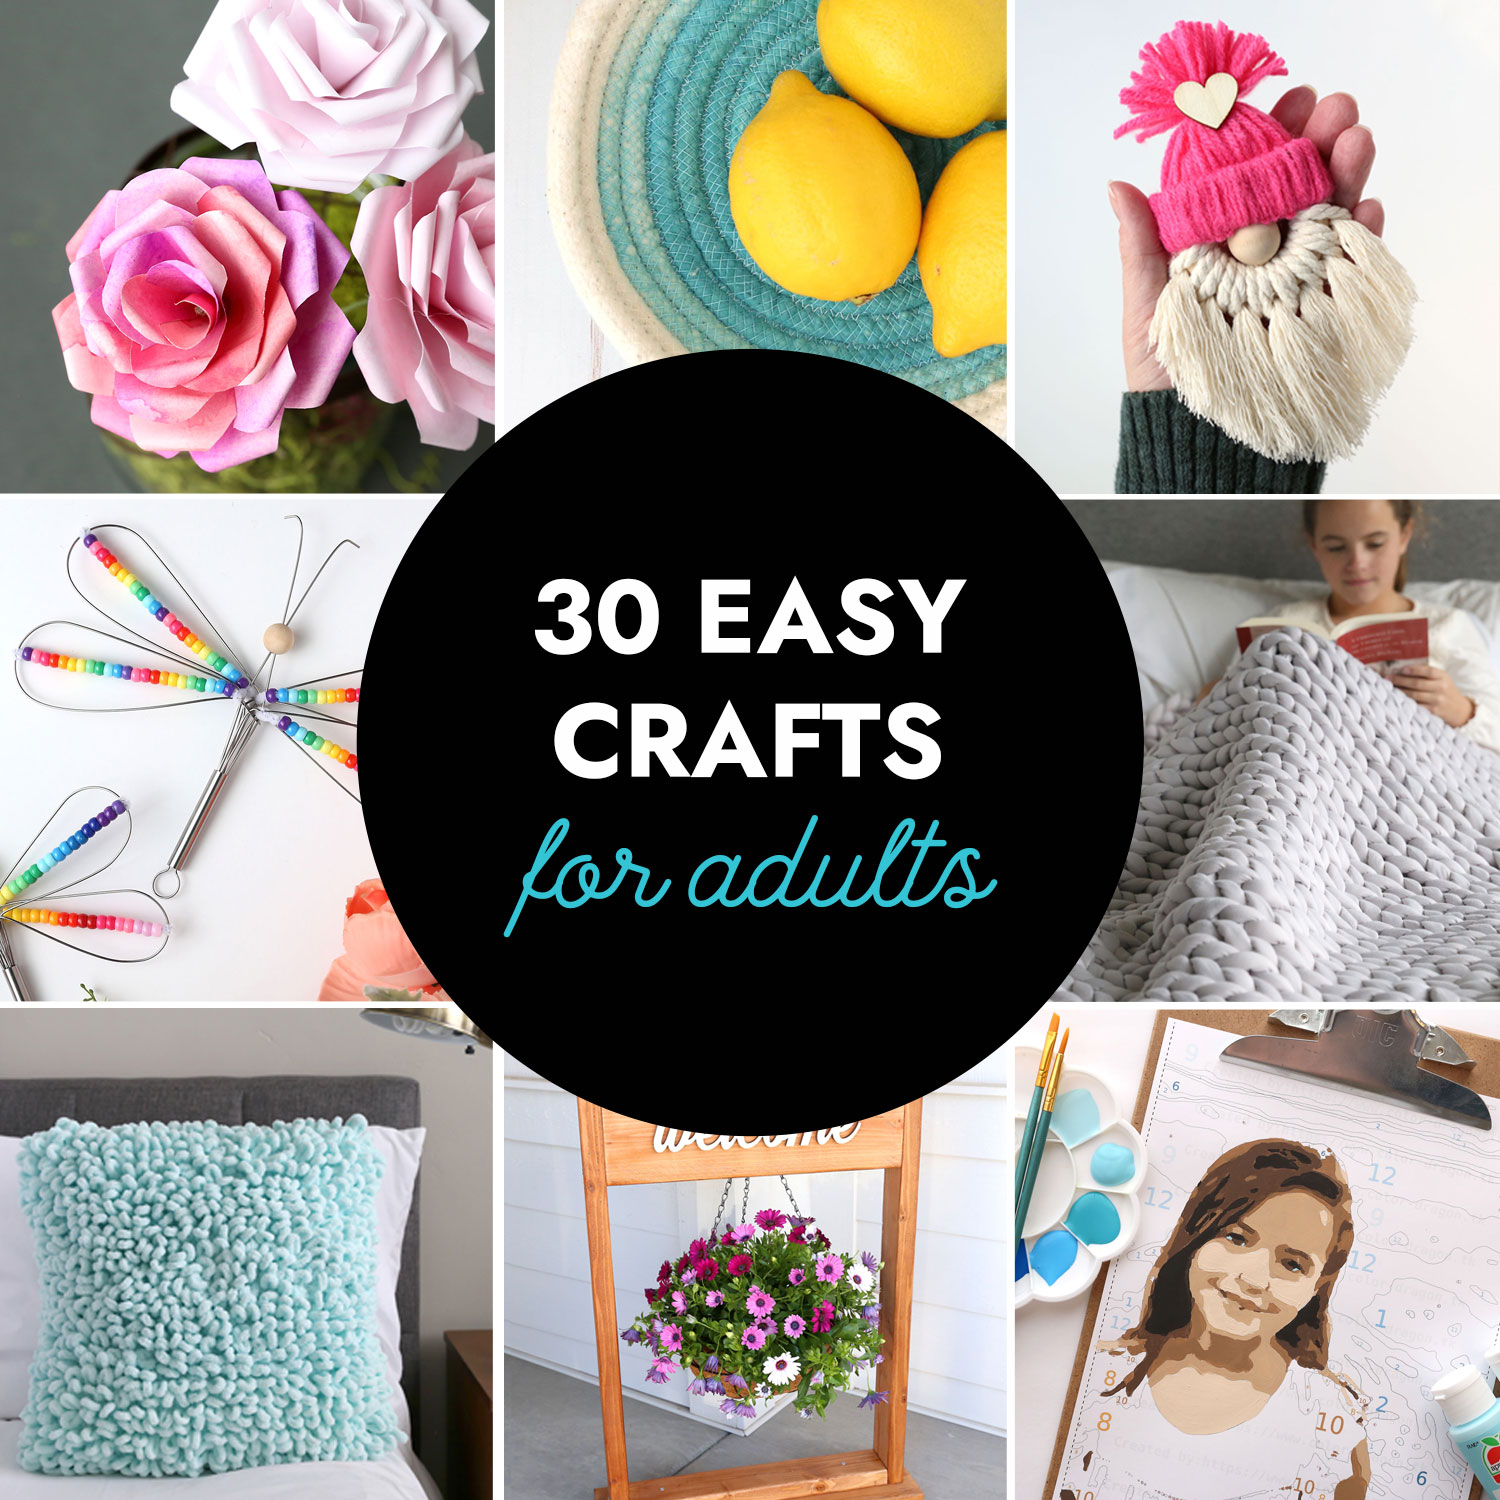 Crafts for Adults: Fun and Easy Ones to Make at Home